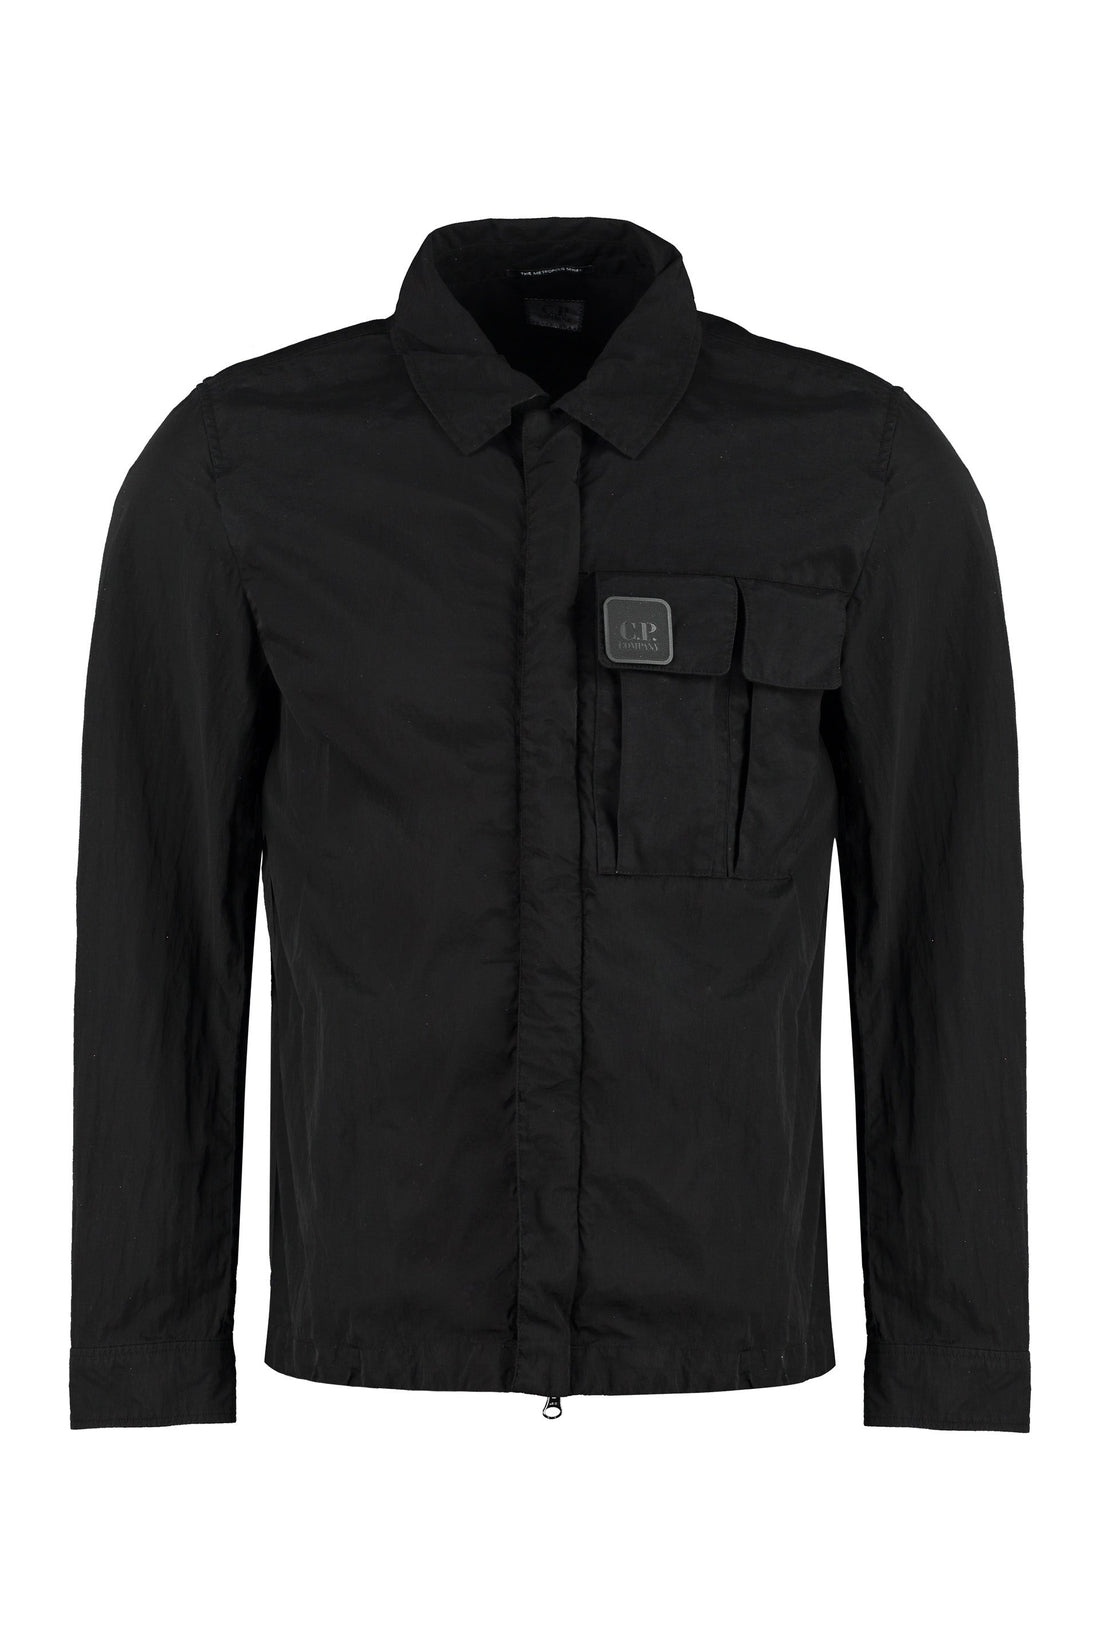 C.P. Company-OUTLET-SALE-Technical fabric overshirt-ARCHIVIST